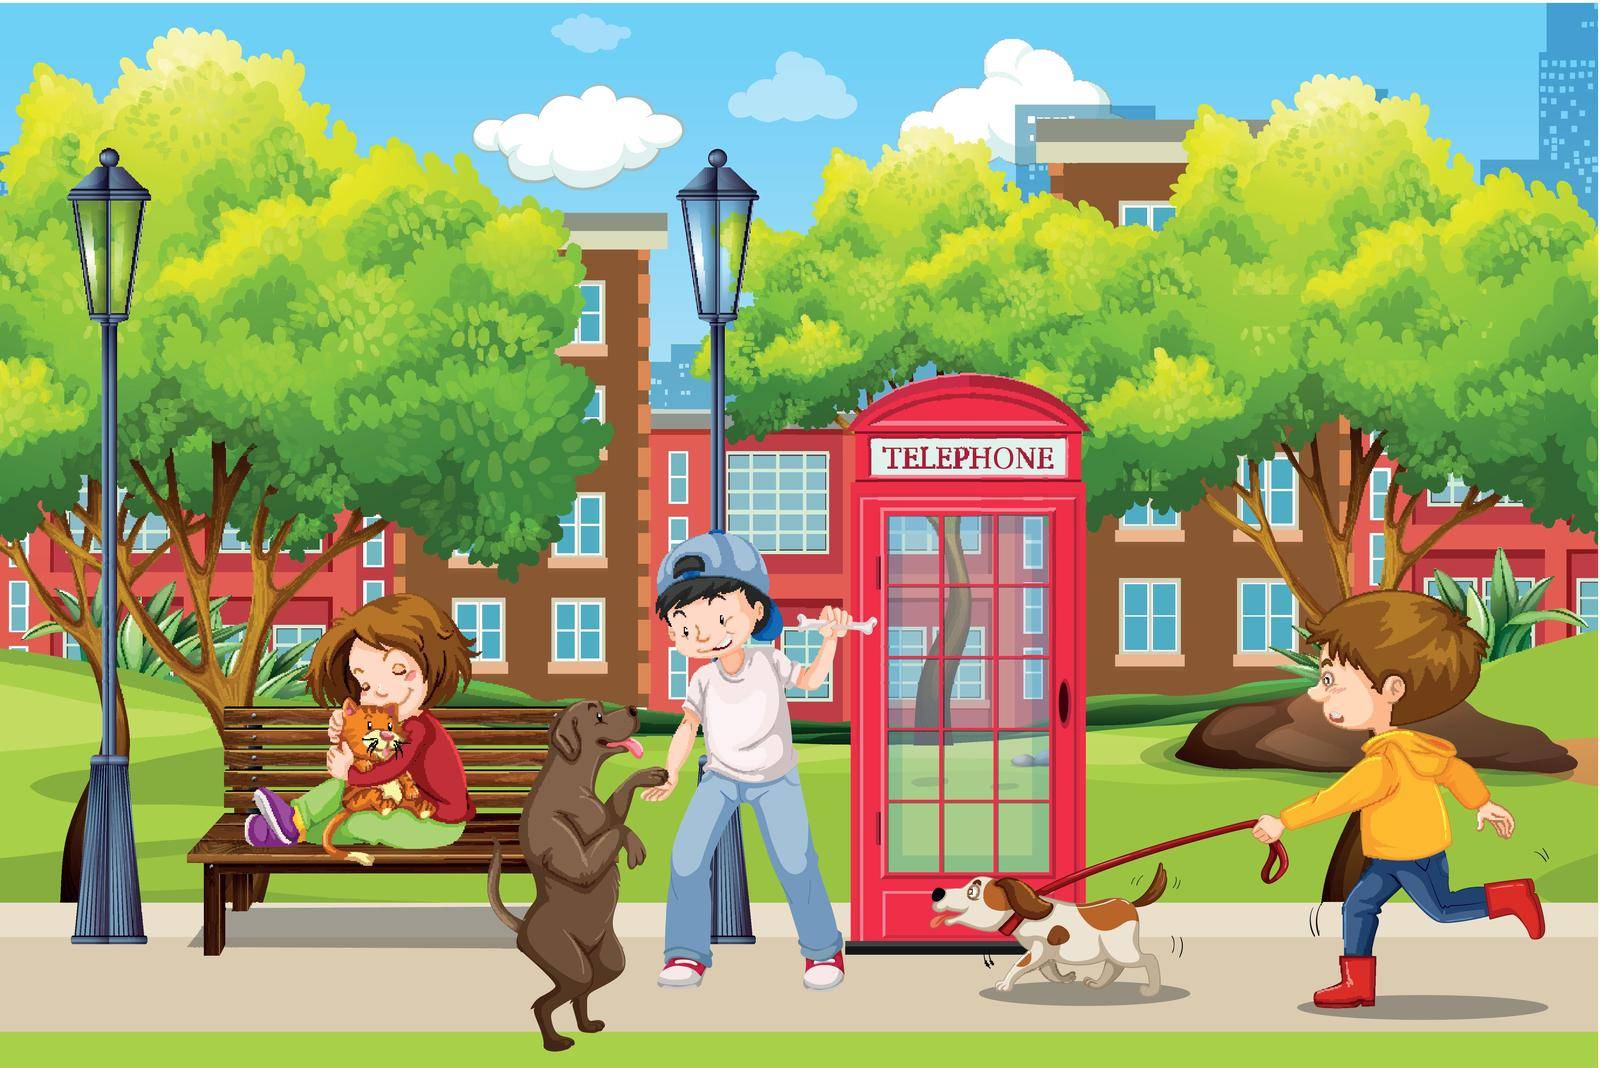 People and their pets in park illustration